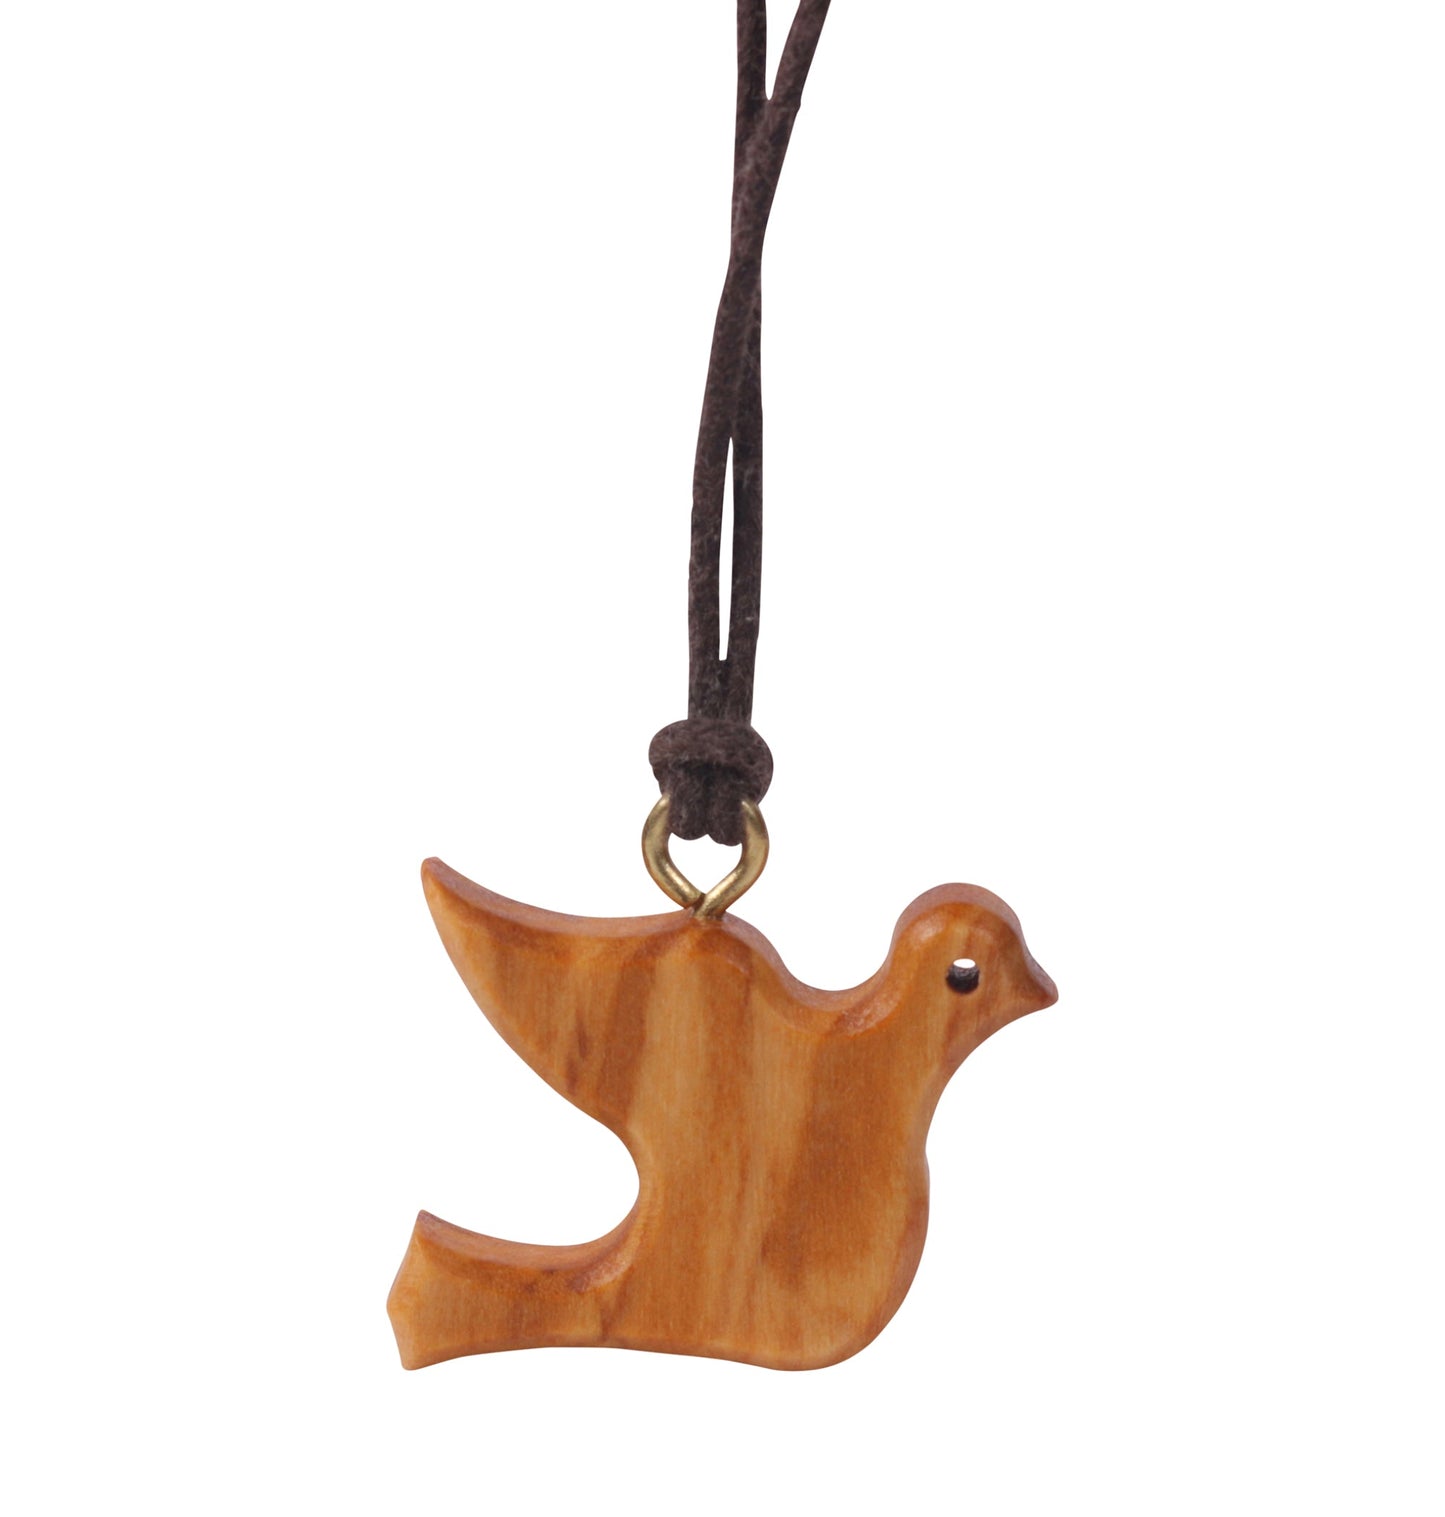 This pendant is a delicately carved representation of a dove, crafted from olive wood, which lends it a rich and warm natural tone. The dove's form is simplistic yet recognizable, capturing the essence of the bird with smooth curves and gentle contours. The dove pendant is attached to a cotton cord, making it suitable for wearing around the neck.